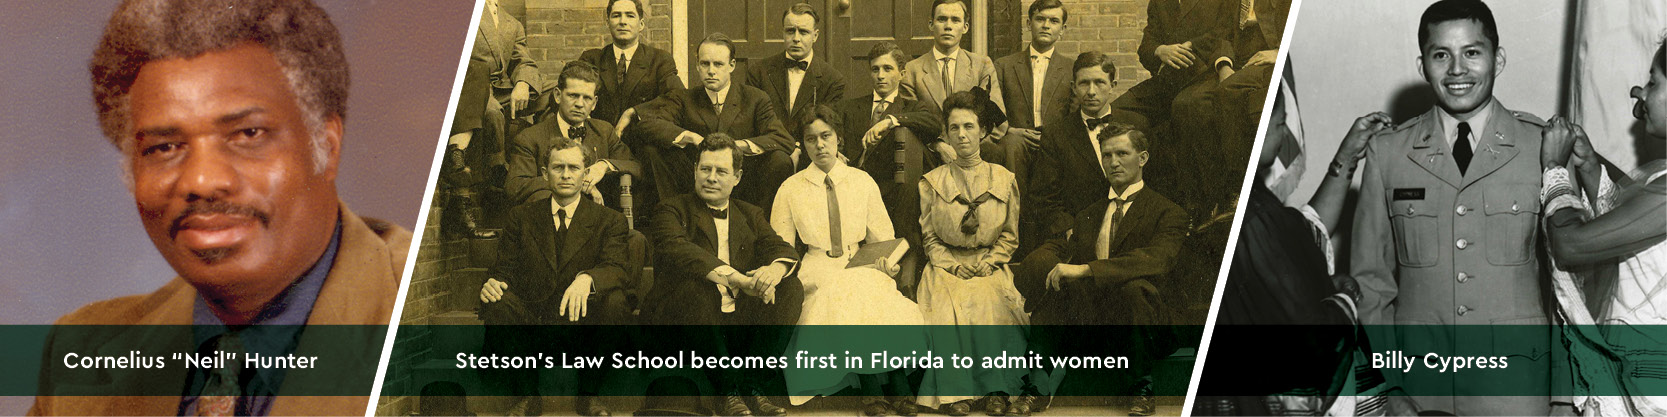 Cornelius Hunter, Stetson's Law School becomes first in Florida to admit women, Billy Cypress